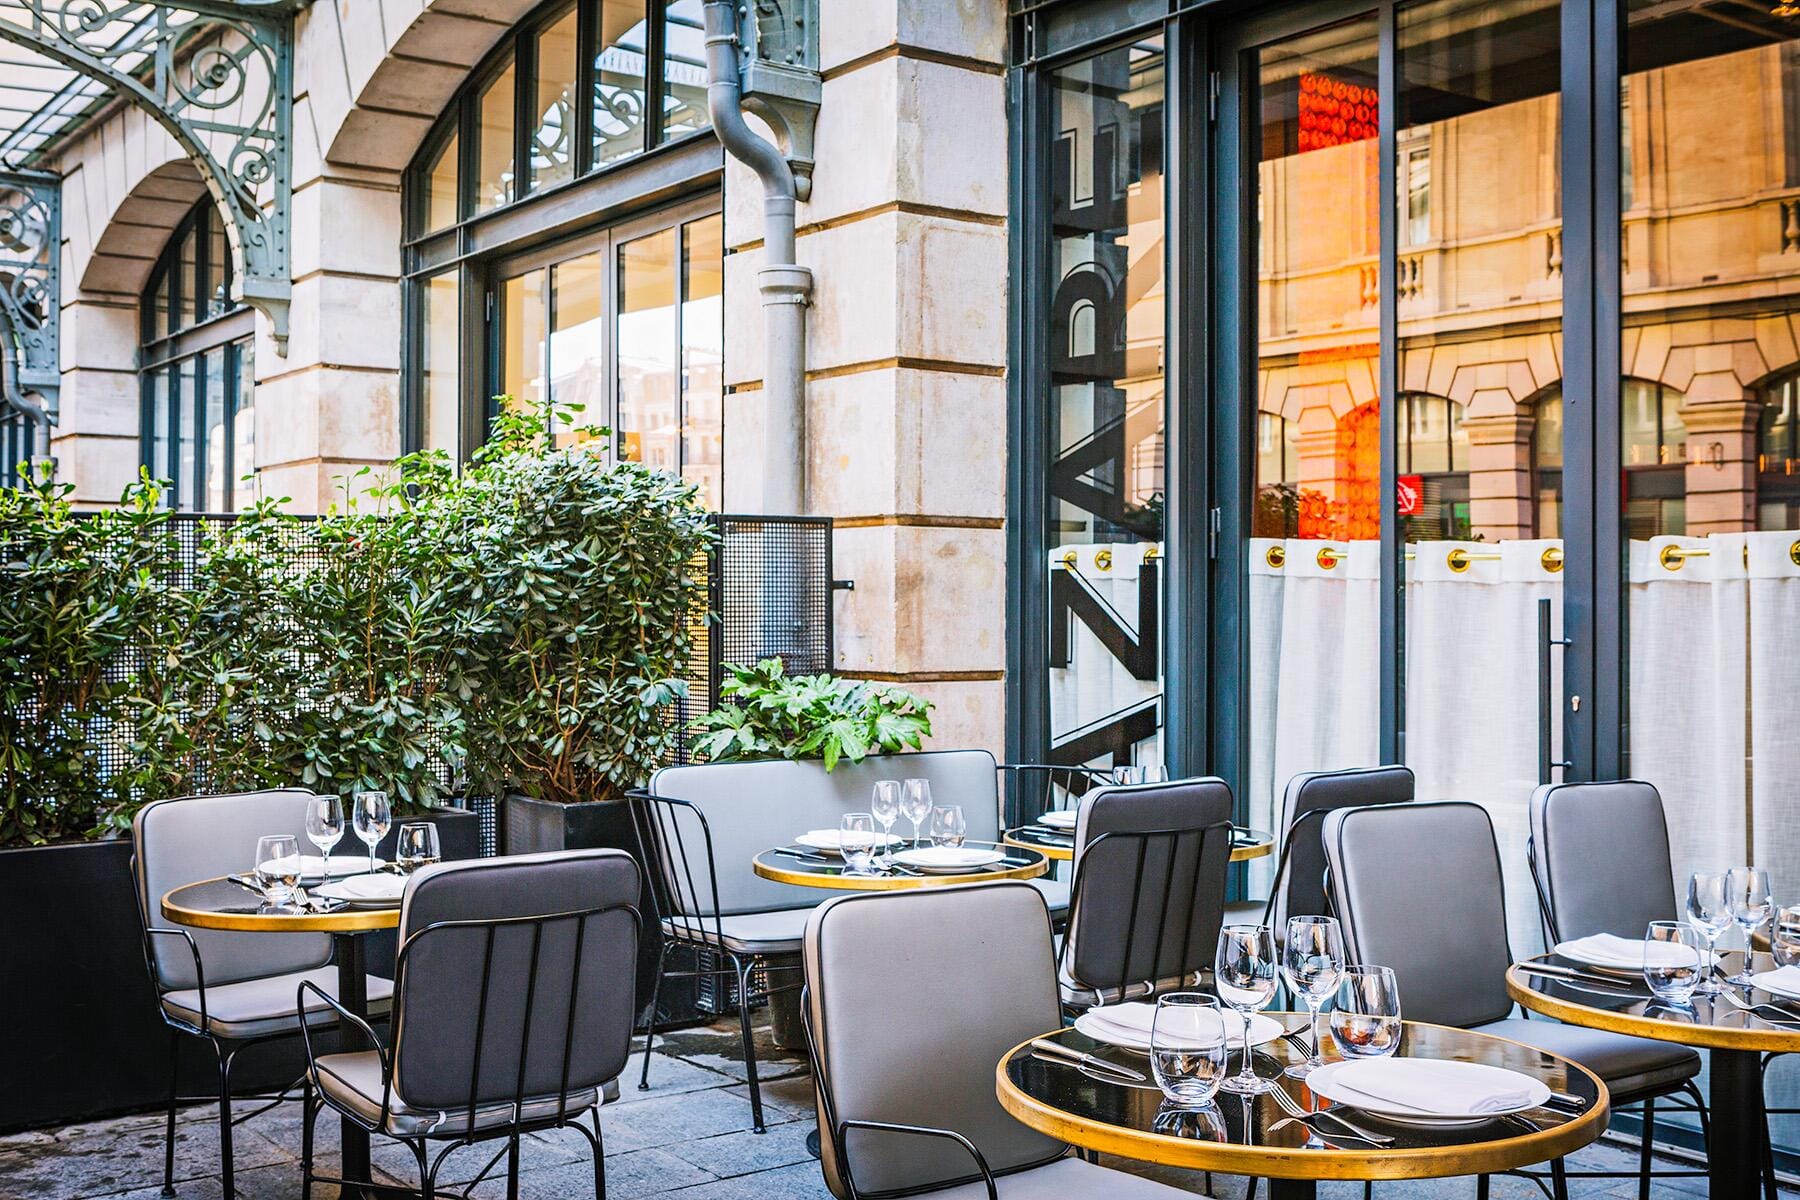 <a href='https://www.fodors.com/world/europe/france/paris/experiences/news/photos/13-restaurants-in-paris-fine-dining-scene-with-affordable-prices#'>From &quot;The 13 Most Affordable Fine-Dining Restaurants in Paris: Brasserie Lazare Paris&quot;</a>